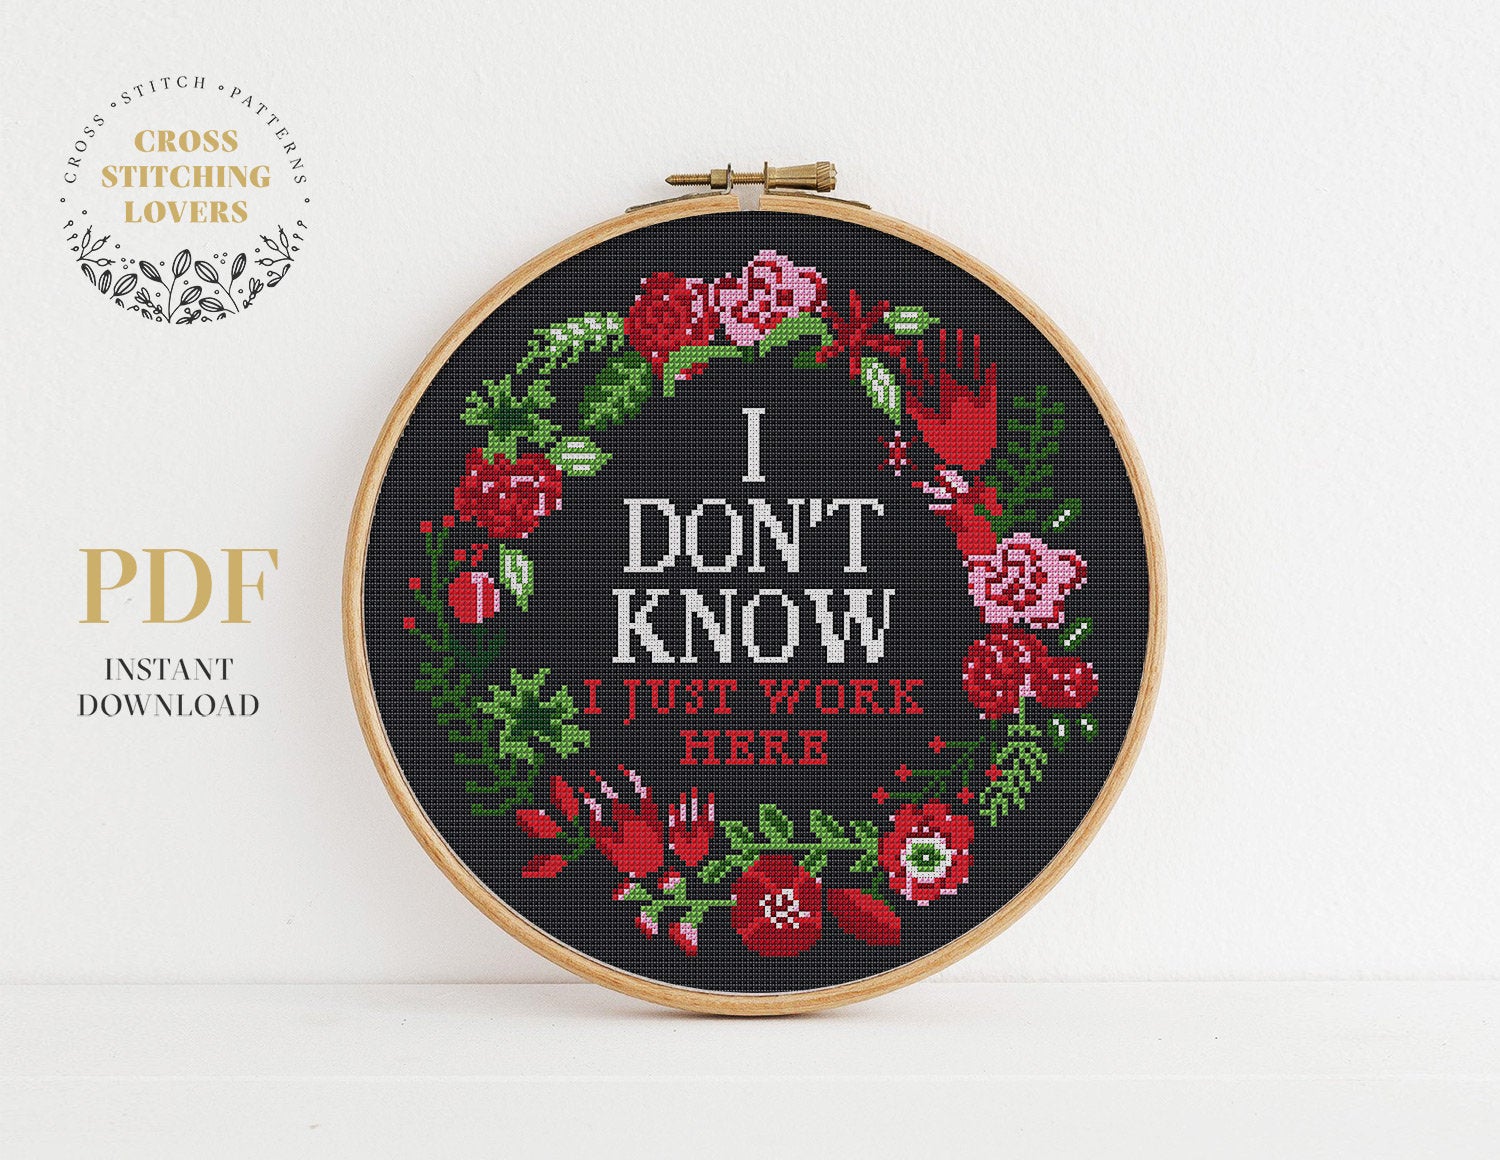 I Don't Know I Just Work Here - Cross stitch pattern